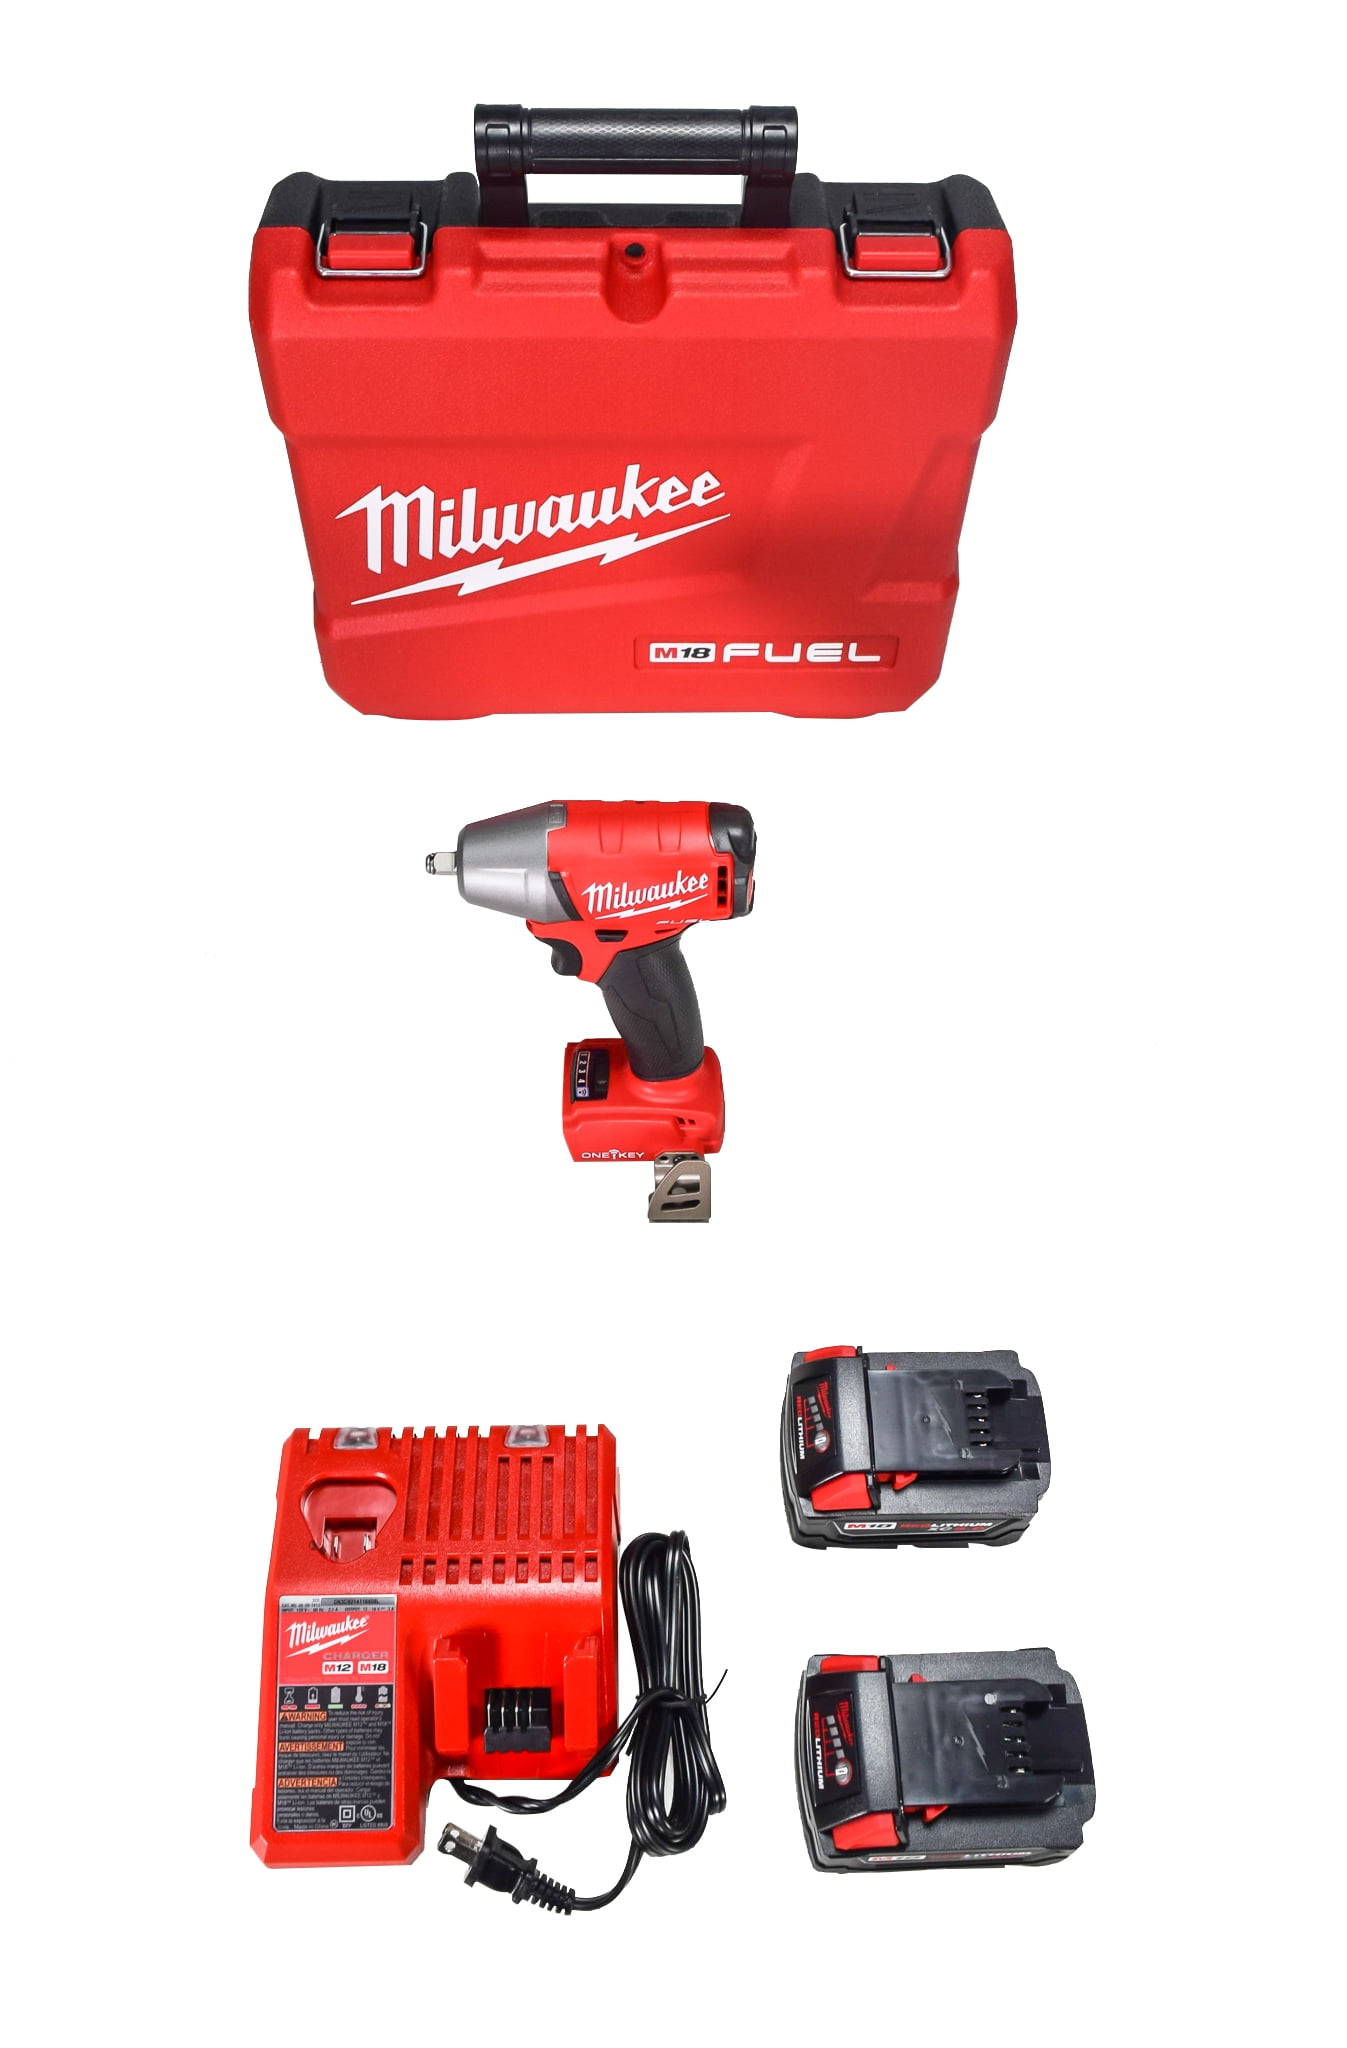 Tool-Only Milwaukee Impact Driver 3/8 in 18V Lithium-Ion Cordless 4-Pole 